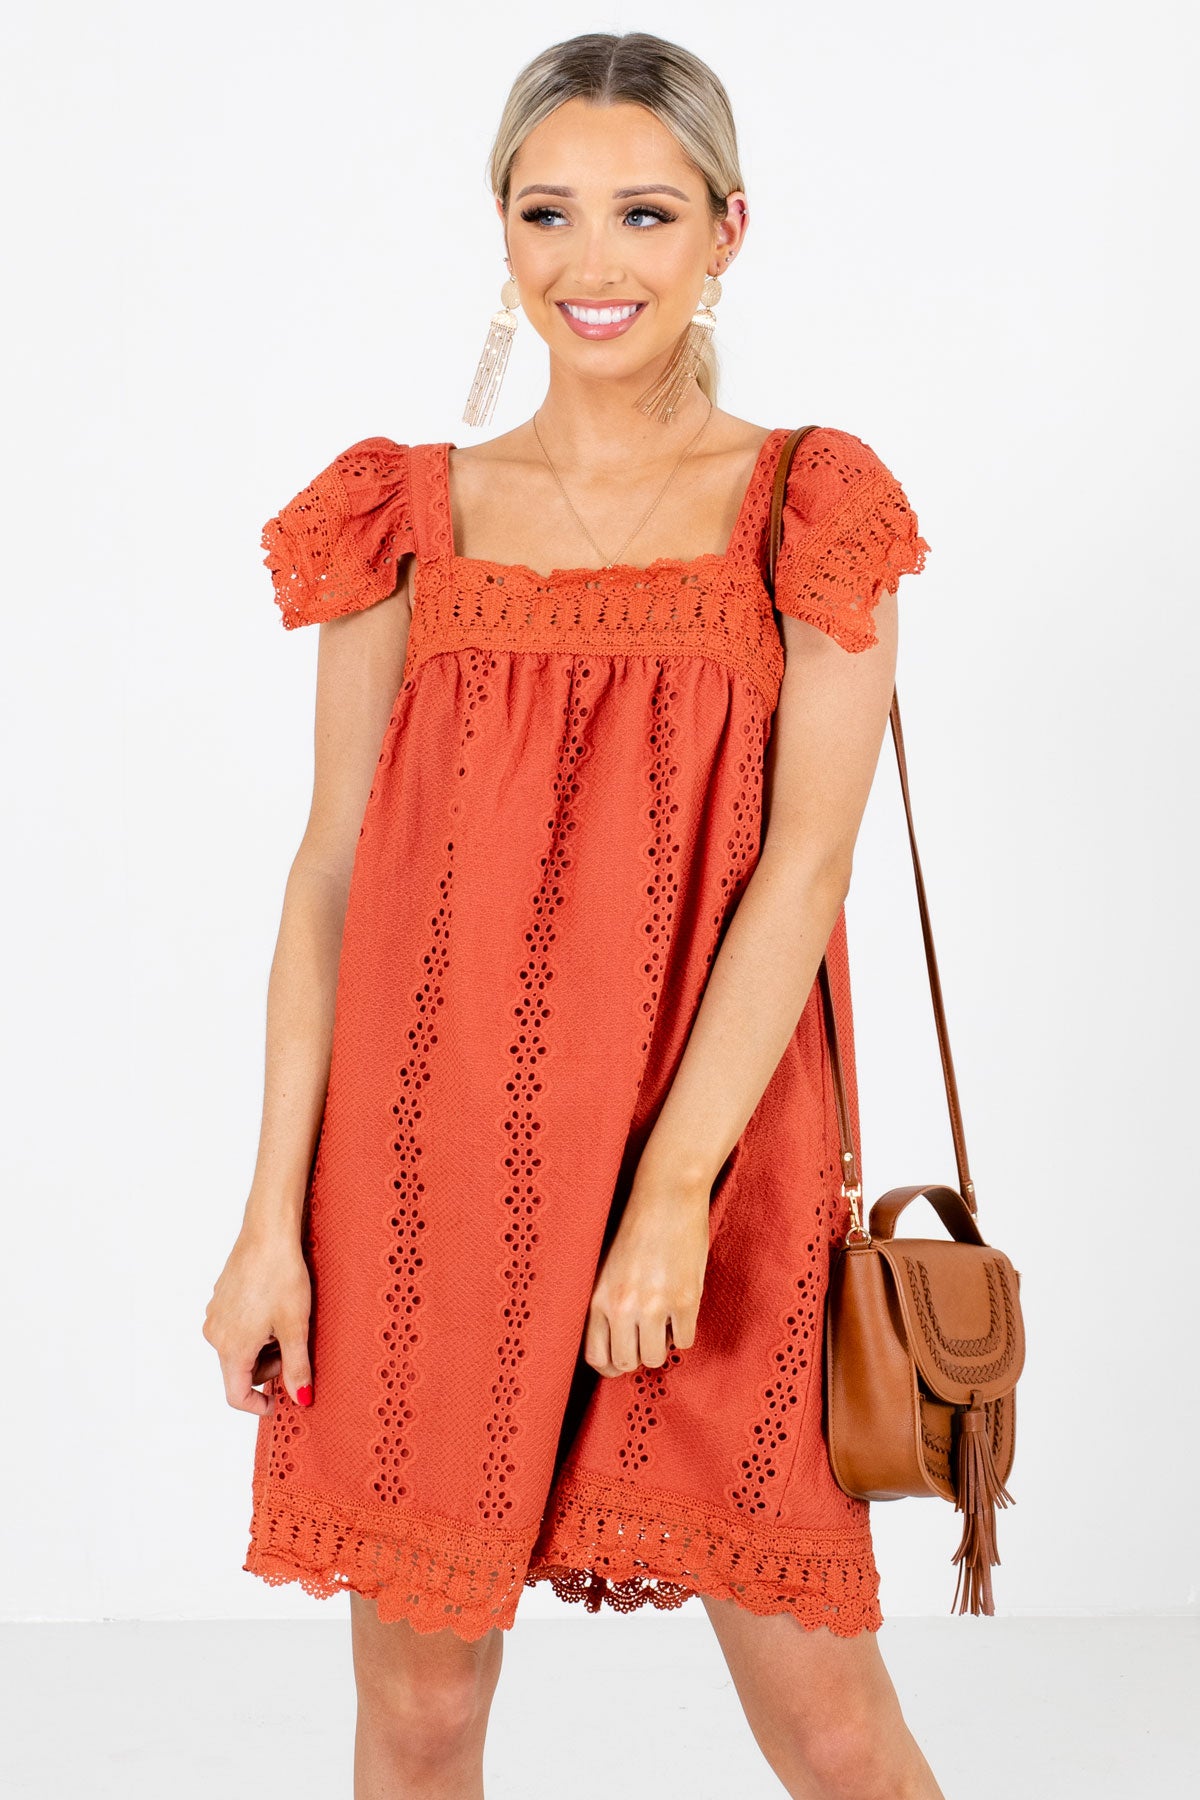 Rust Orange High-Quality Eyelet Material Boutique Mini Dresses for Women